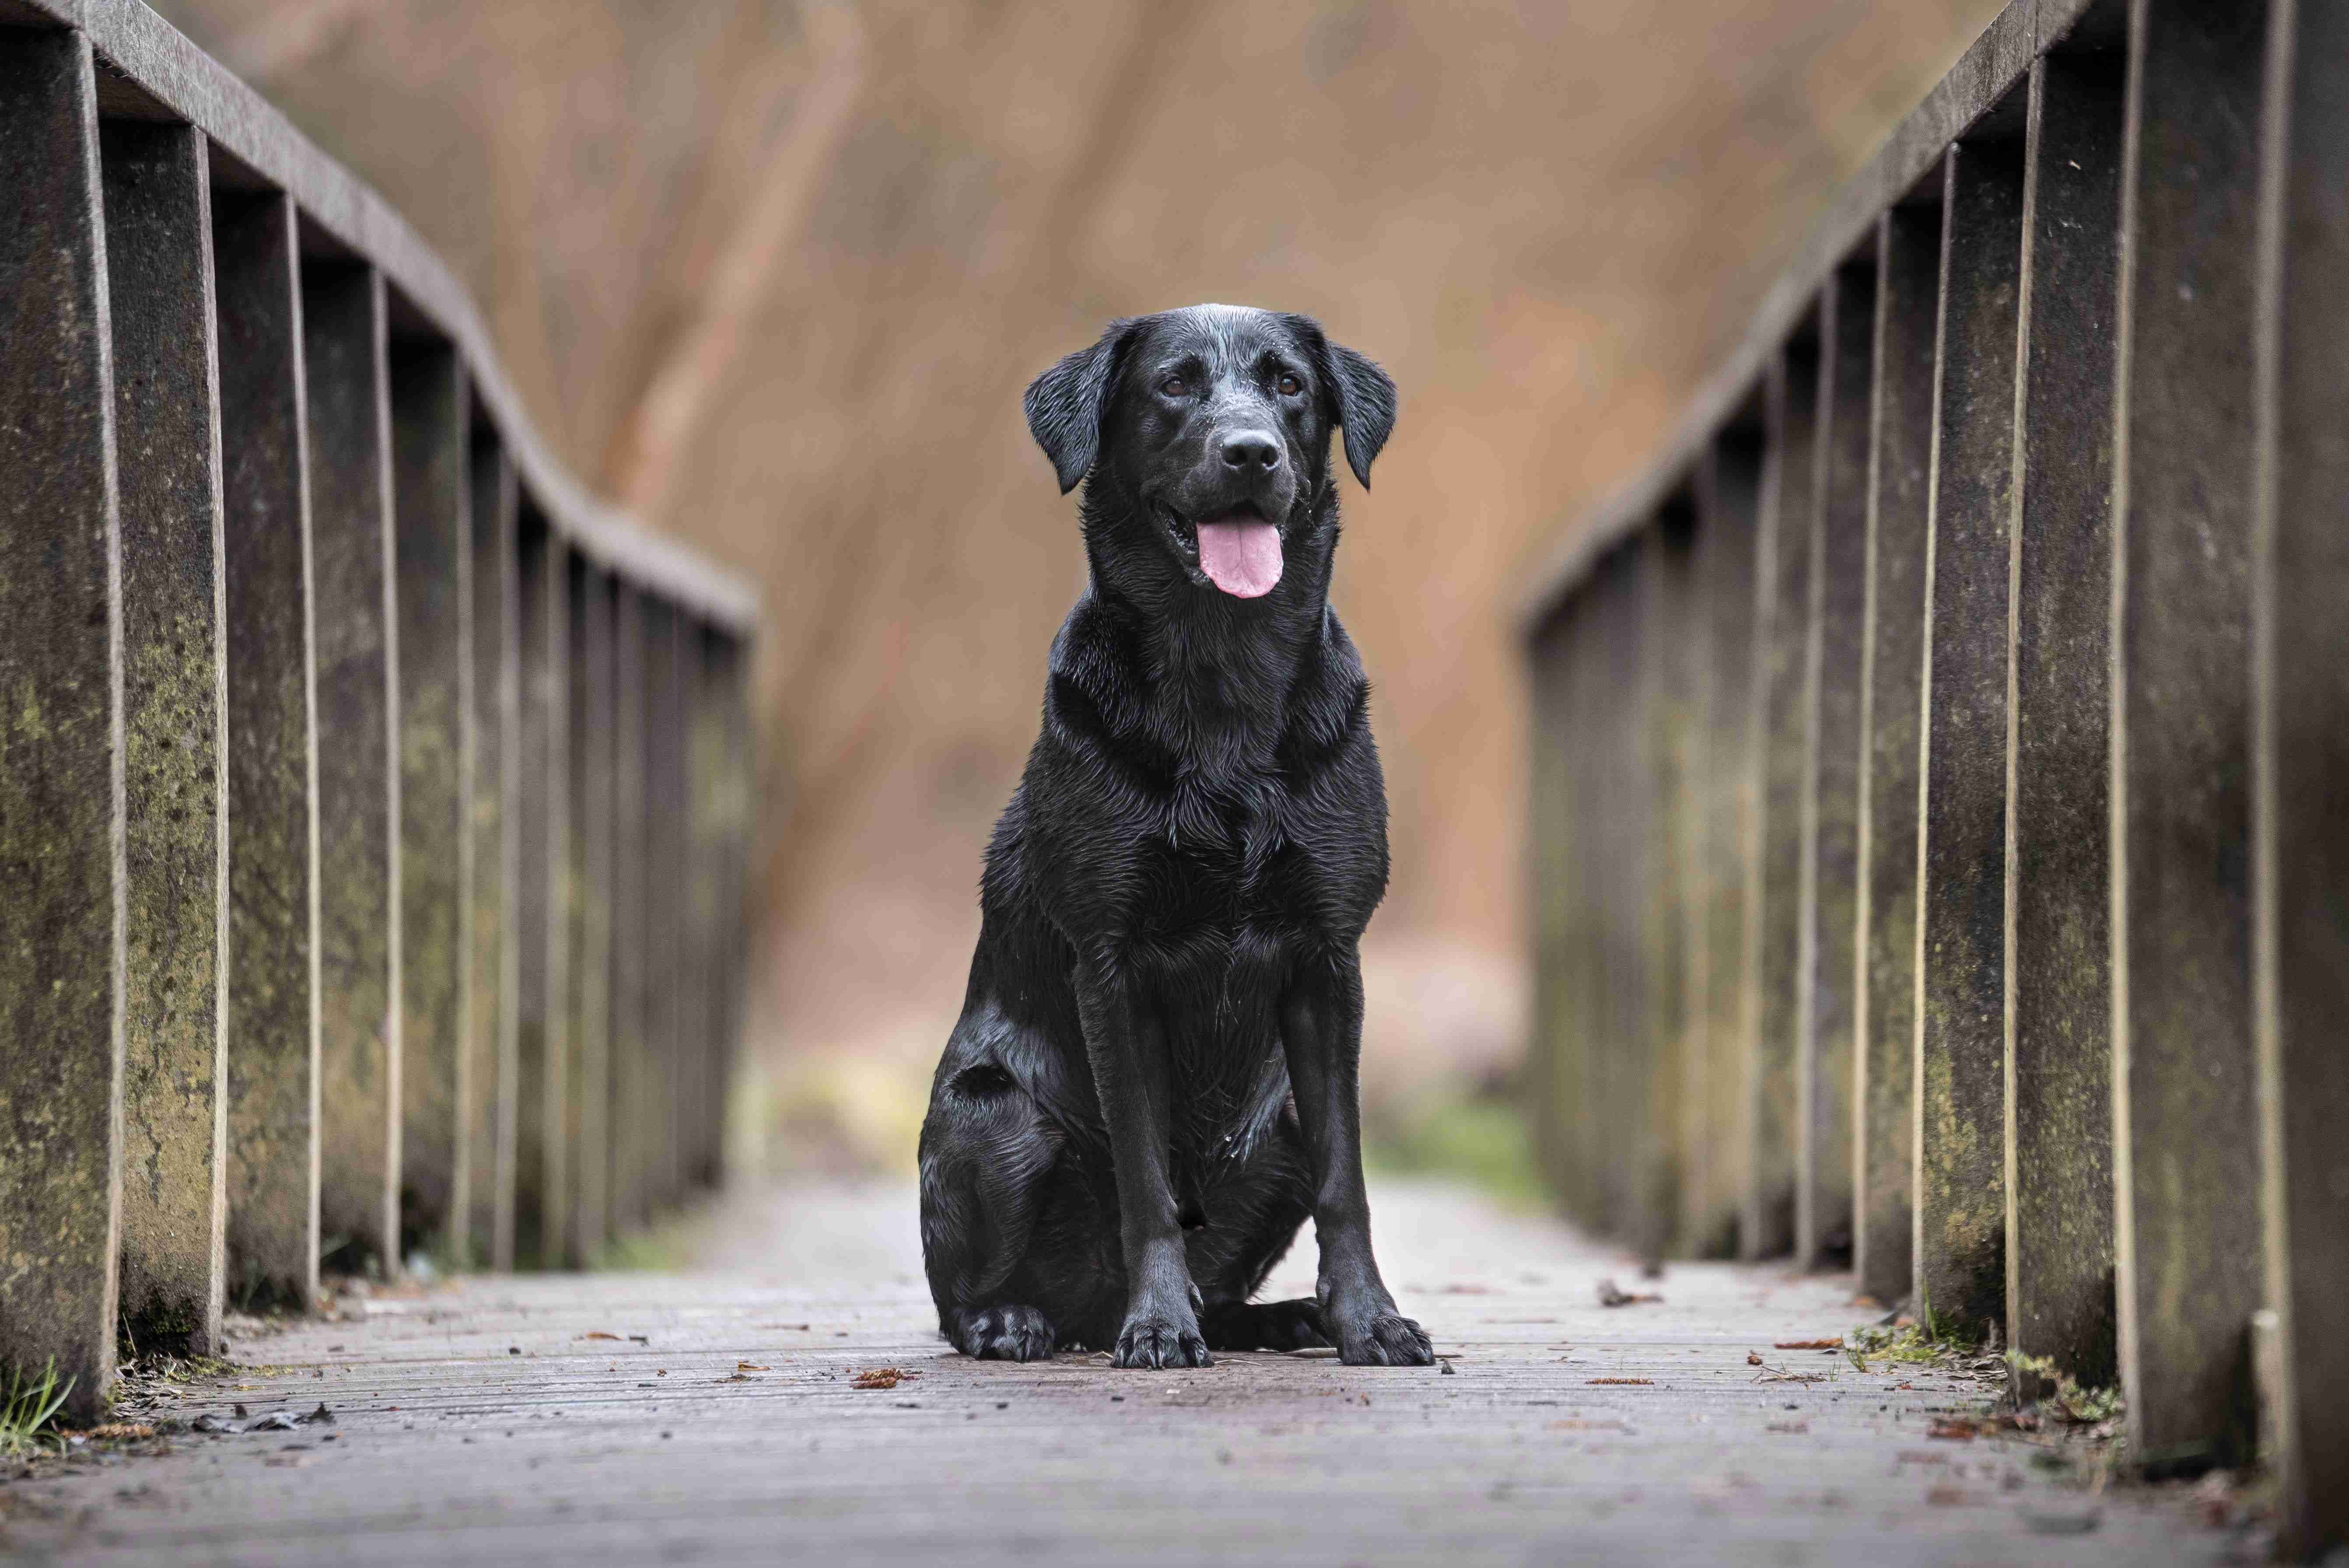 Labrador Retriever Grooming: The Importance of Regularly Checking for Lumps and Bumps